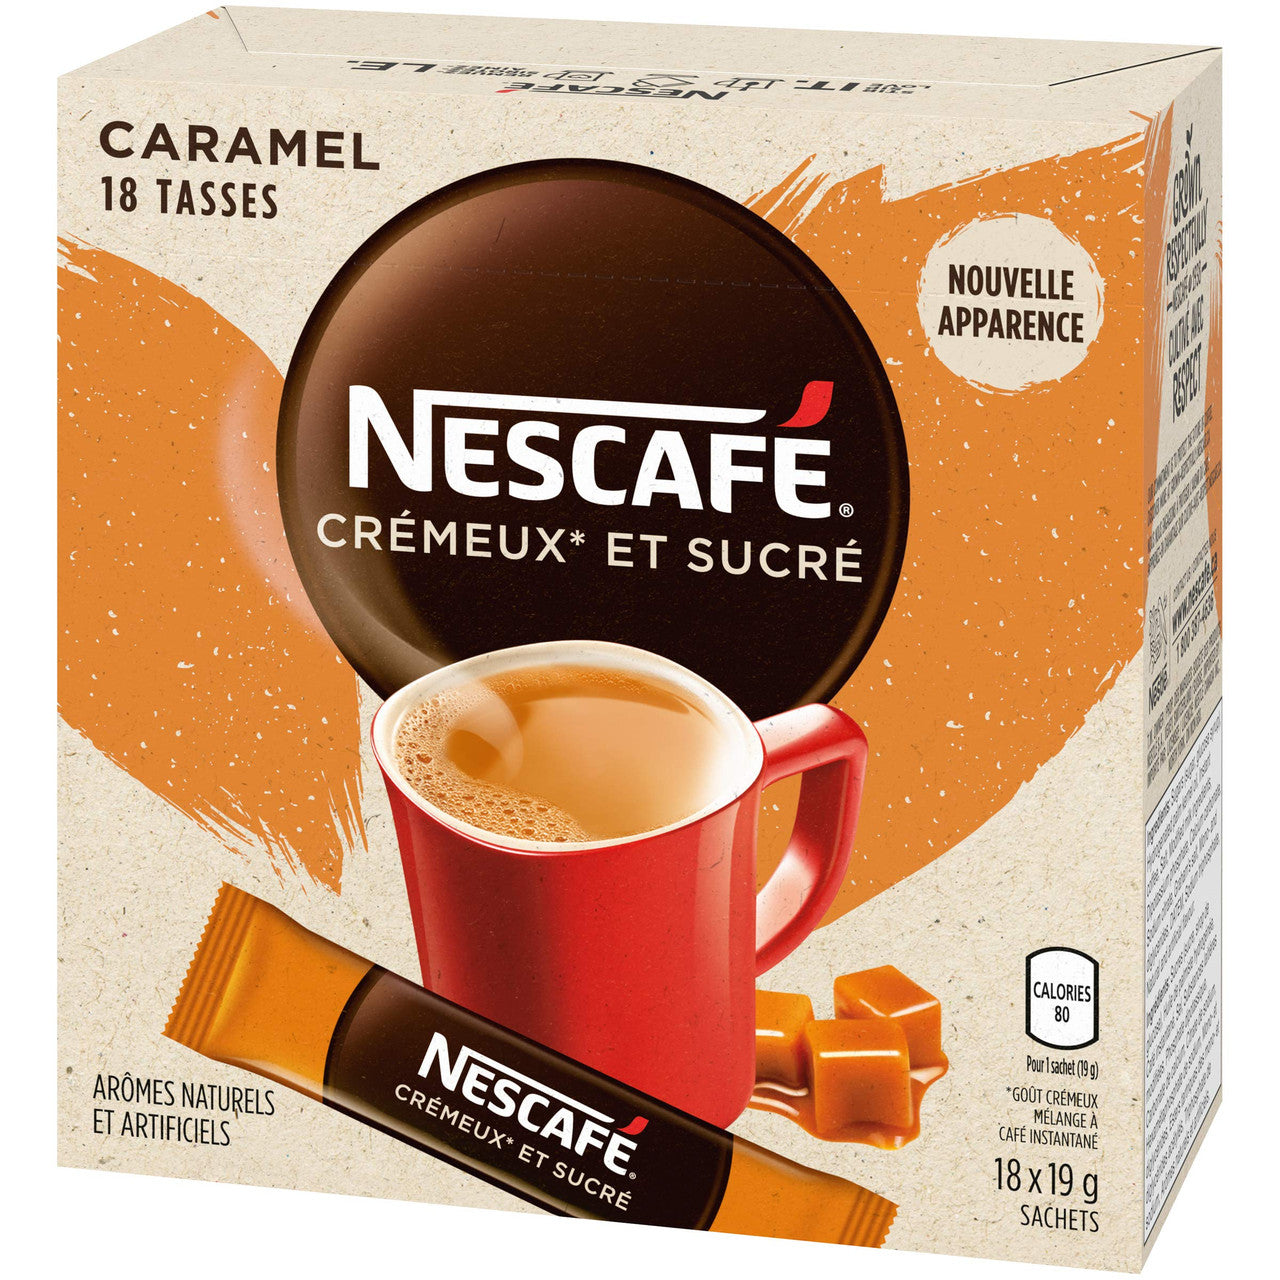 NESCAFE Sweet & Creamy Caramel, Instant Coffee Sachets, 18x19g {Imported from Canada}